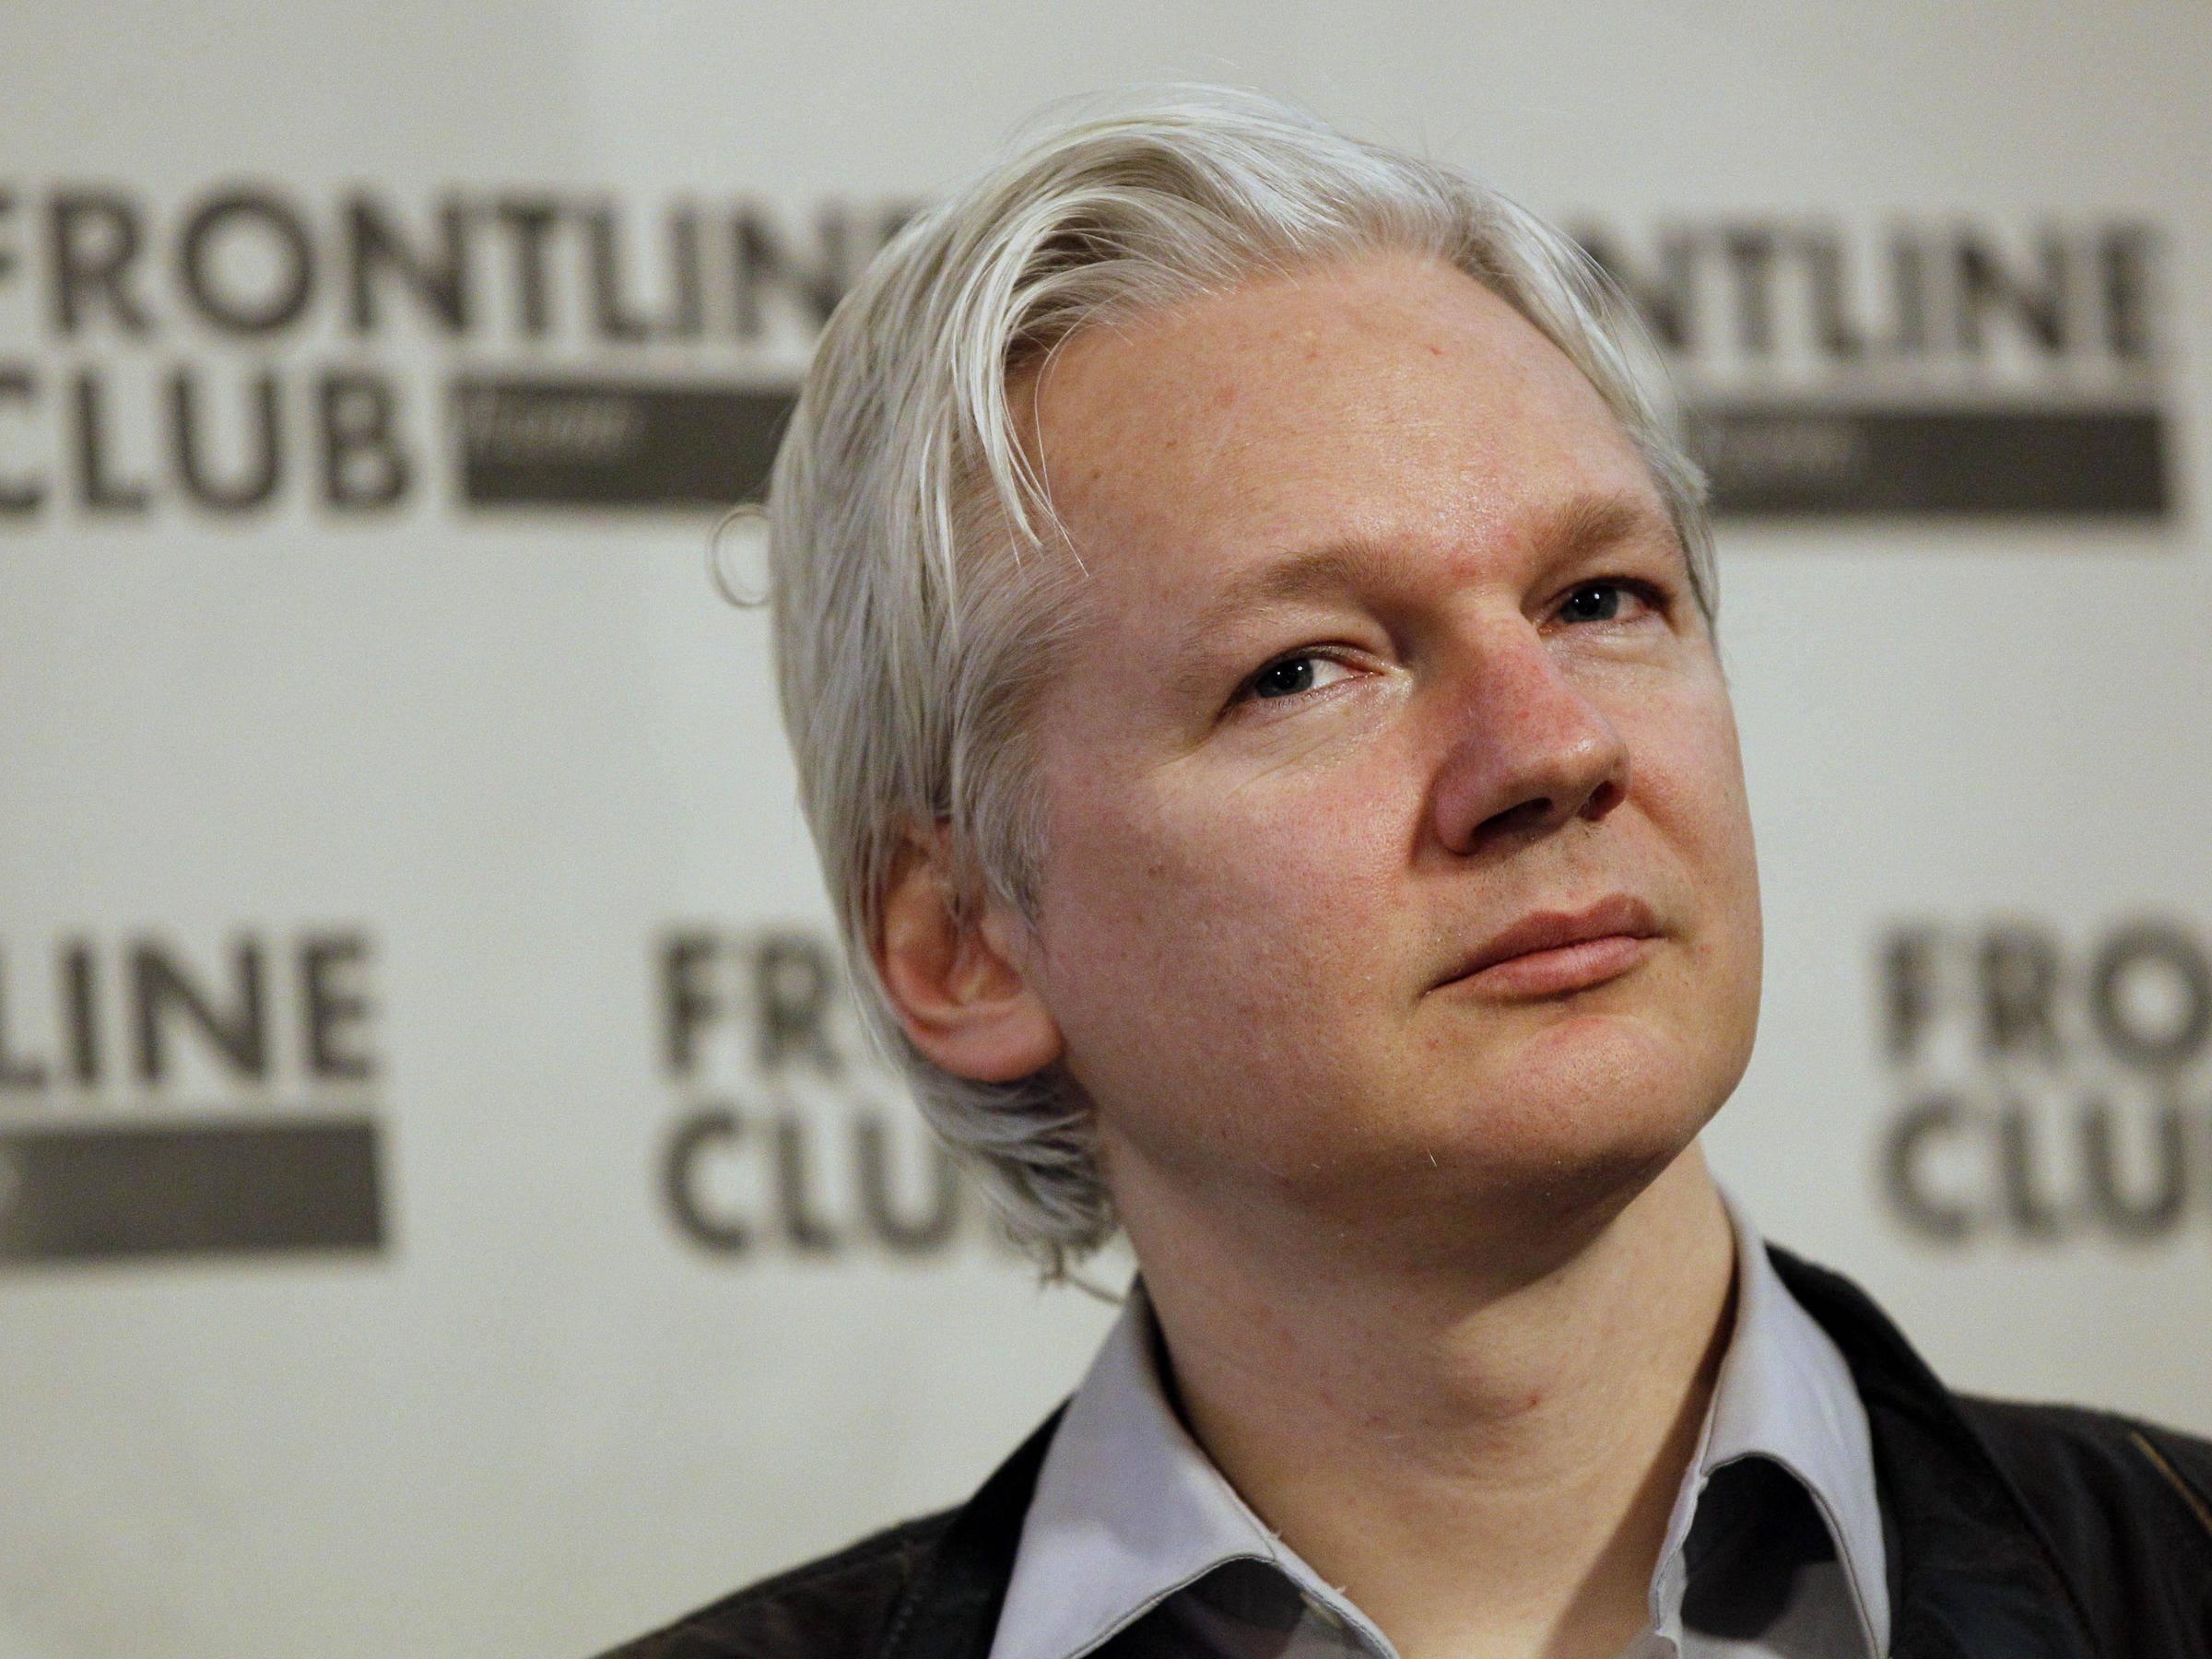 2400x1800 WikiLeaks founder Julian Assange appears at a 2012 press conference in  London. Author Peter Carey says he was drawn to Assange's story because of  their ...